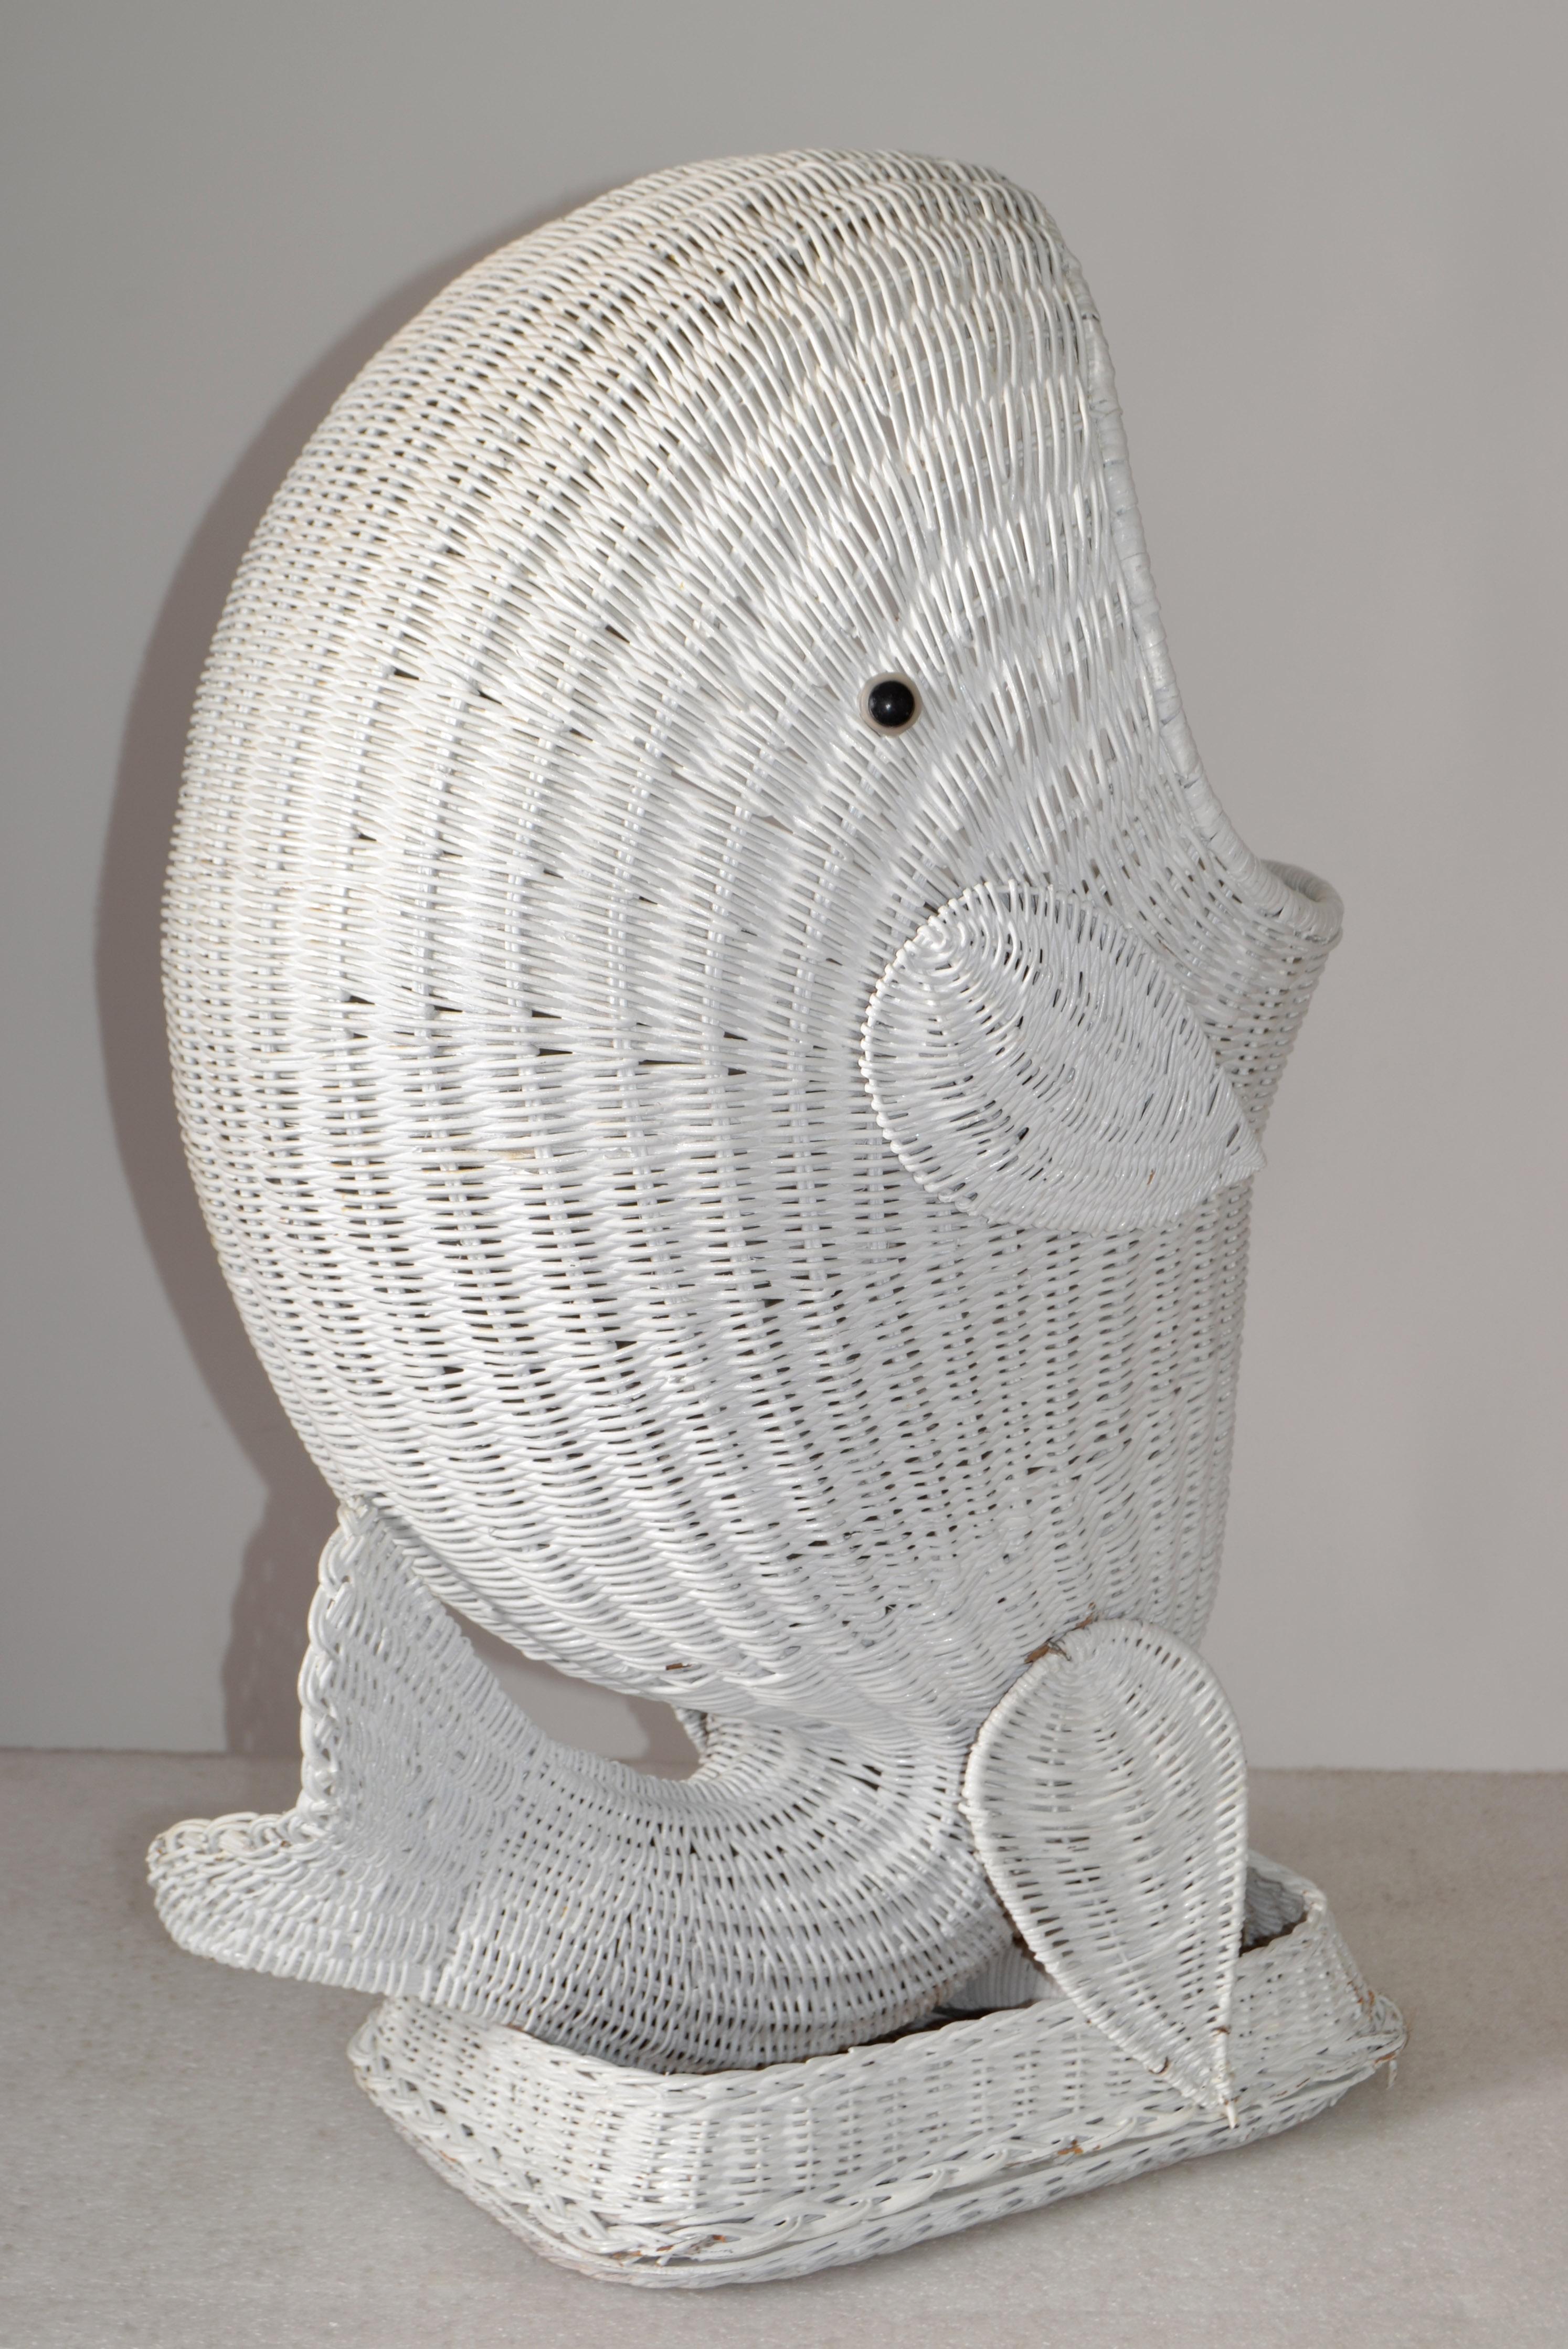 White Hand-Woven Rattan Dolphin Storage Toy Basket Sculpture 1970 Bohemian Chic For Sale 1